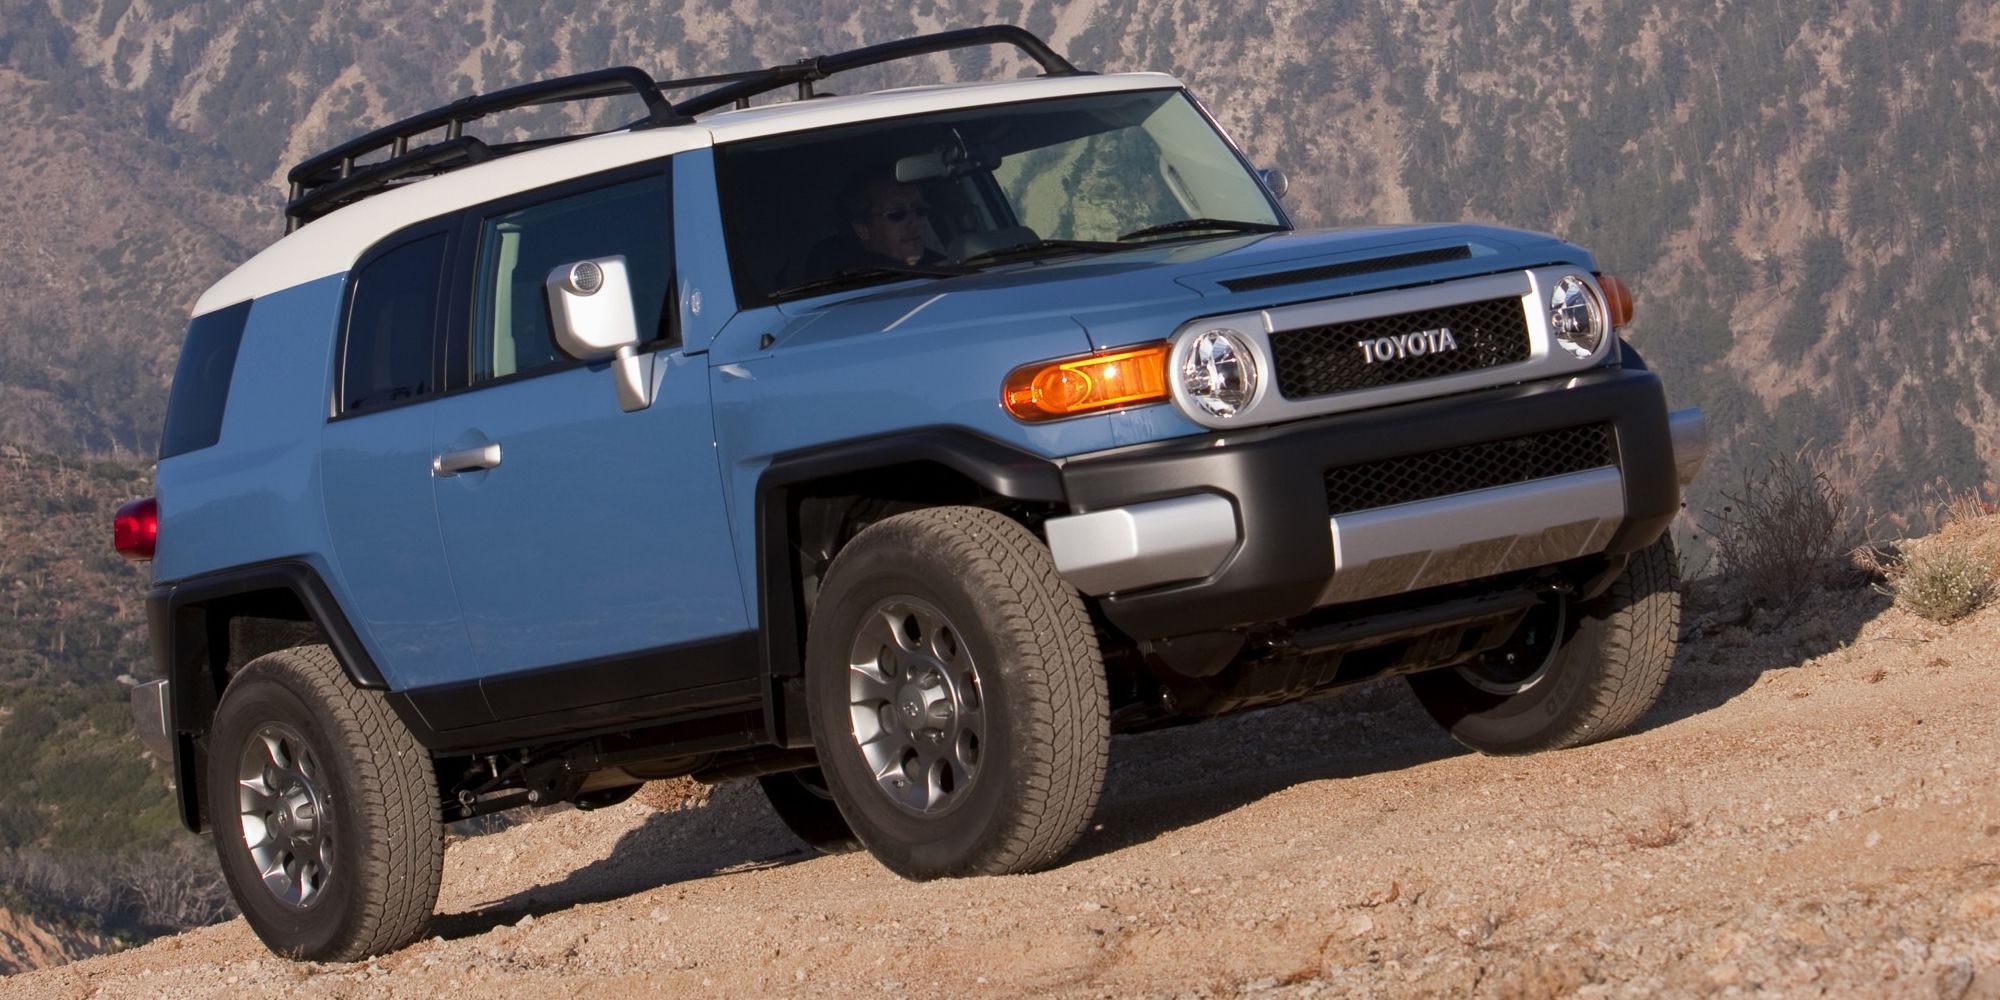 The front of a blue FJ Cruiser